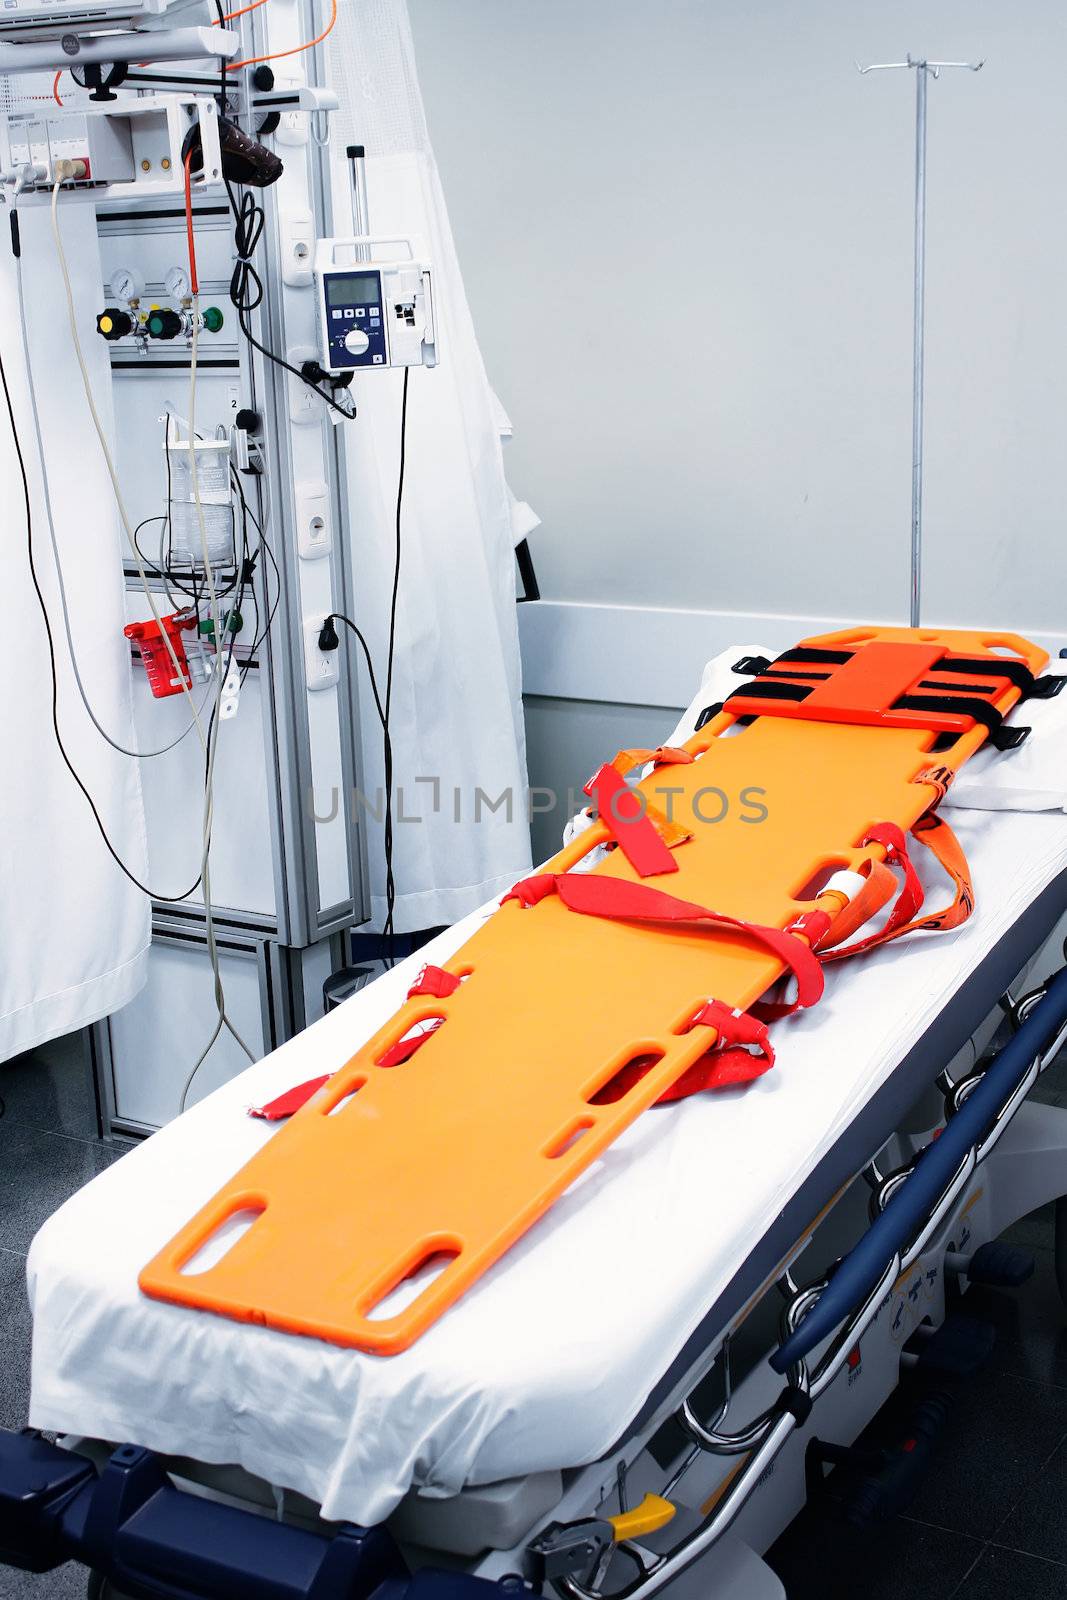 Stretcher in the shock room at hospital